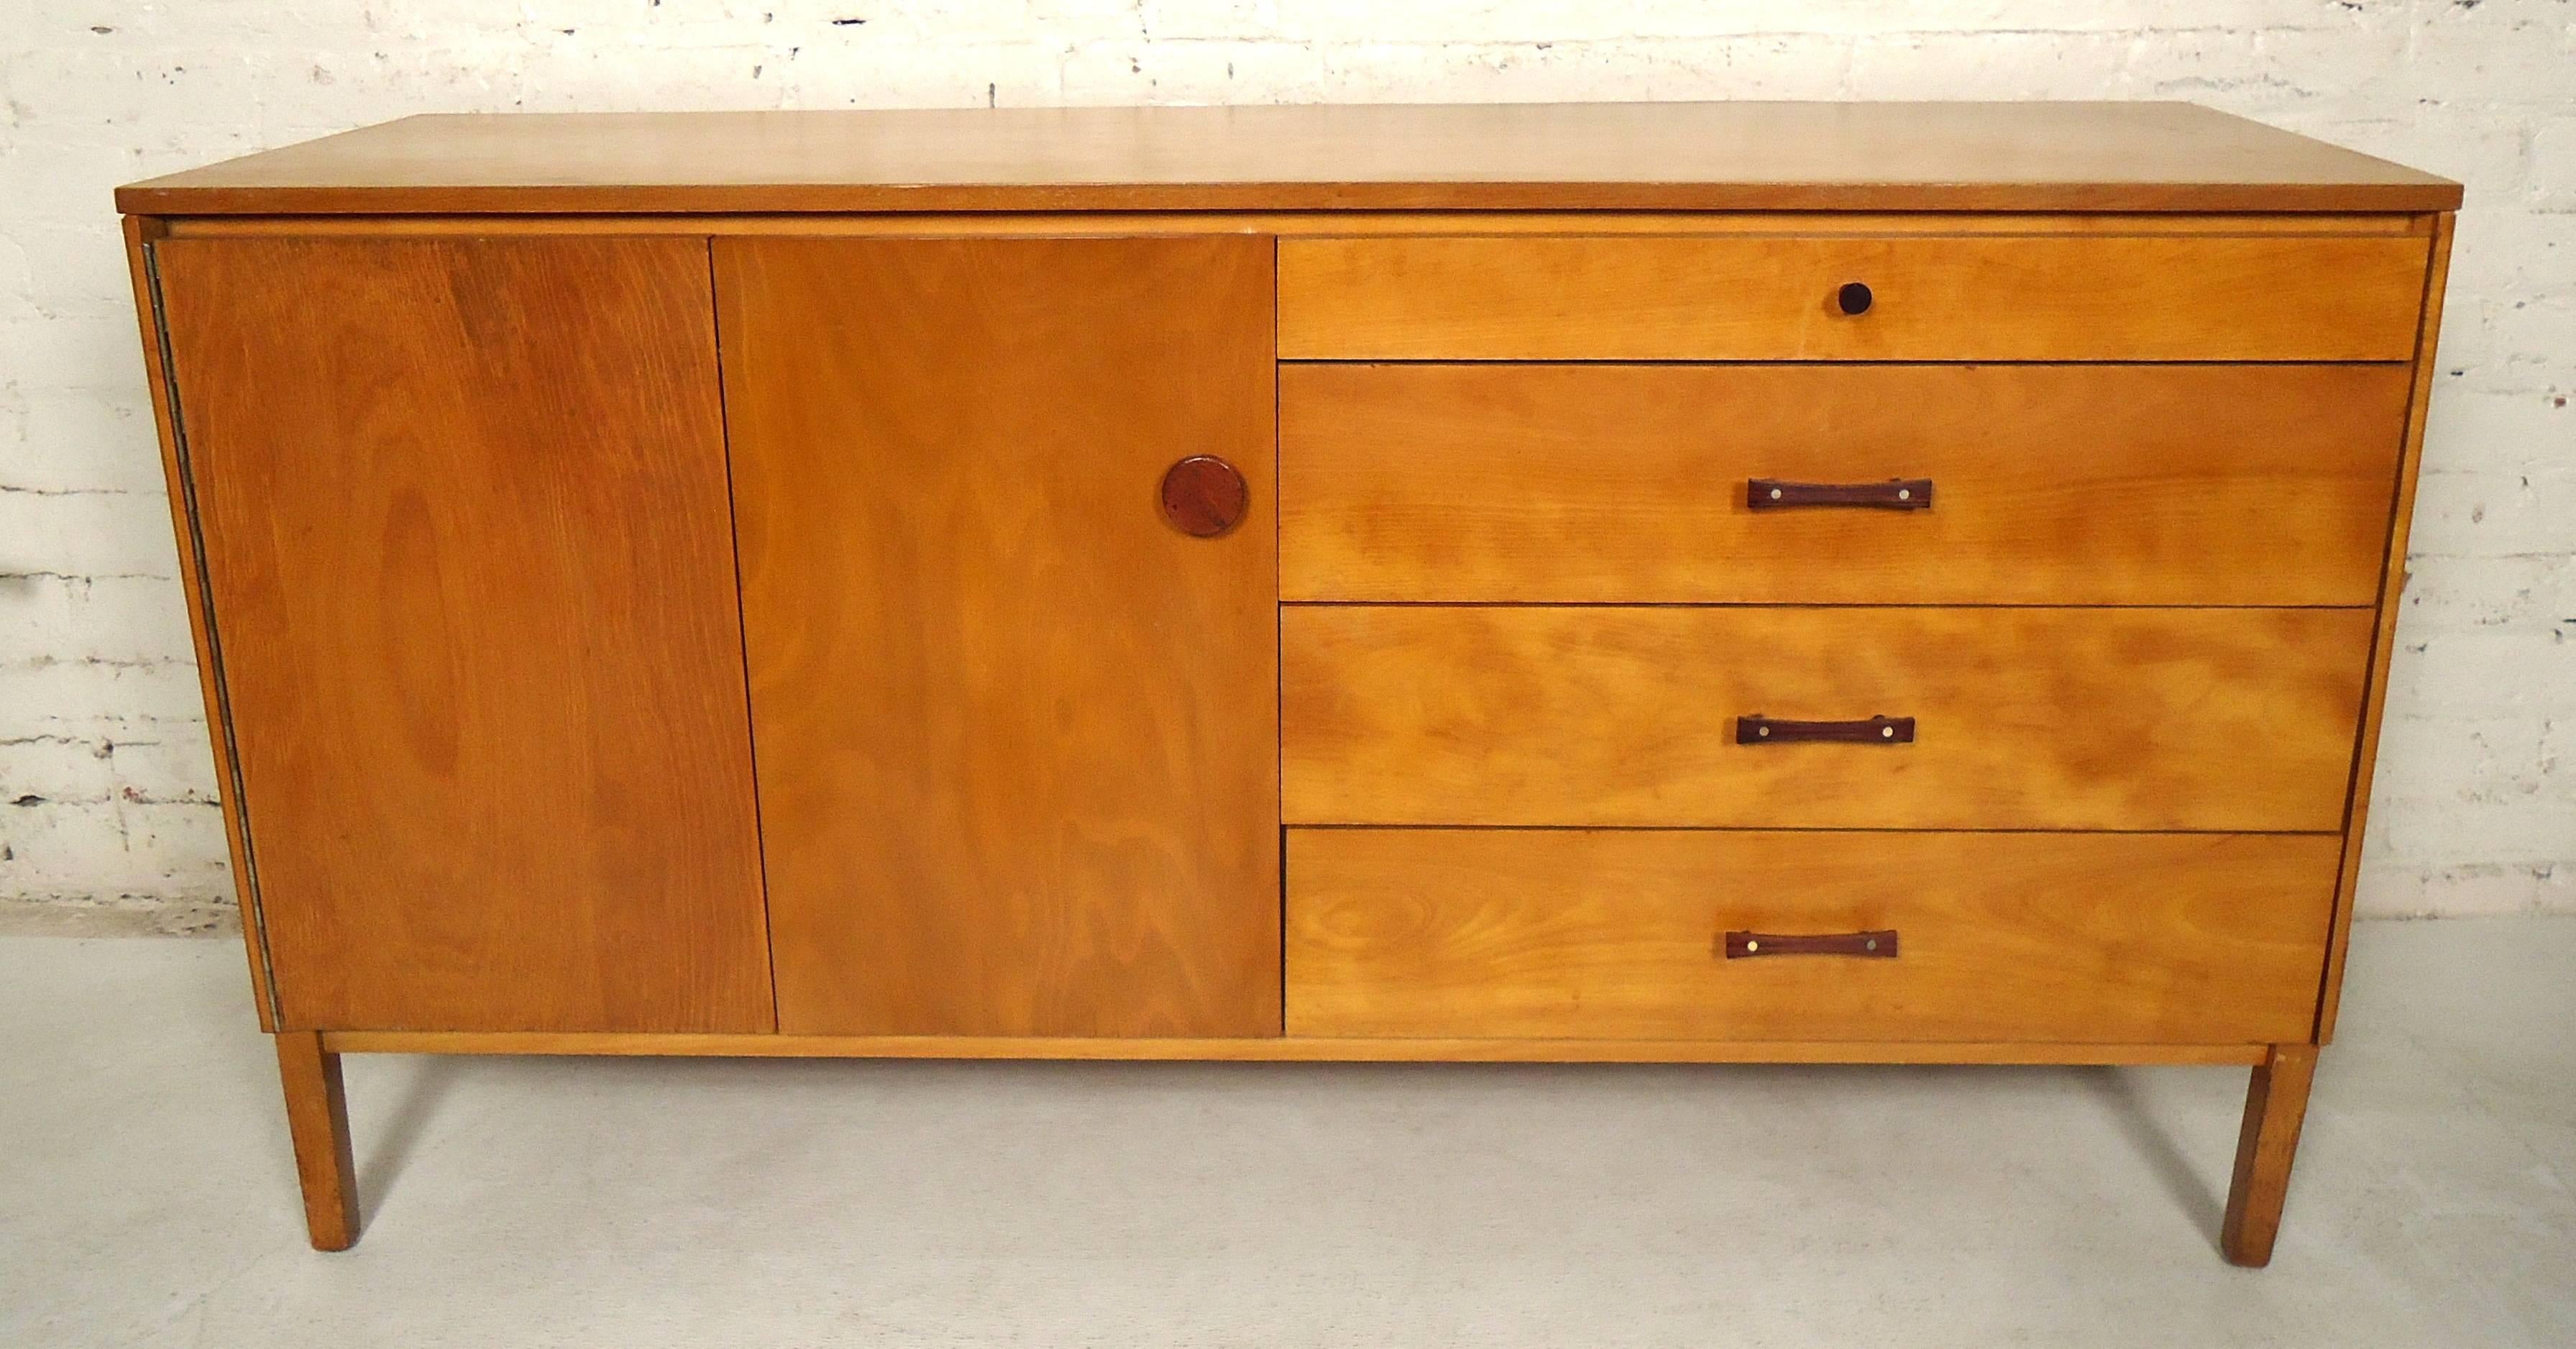 Very unique Mid-Century Modern Paul McCobb server features four drawers, three with bow tie pulls, one hand-carved pull, and a very spacious storage unit.

Please confirm item location (NY or NJ).